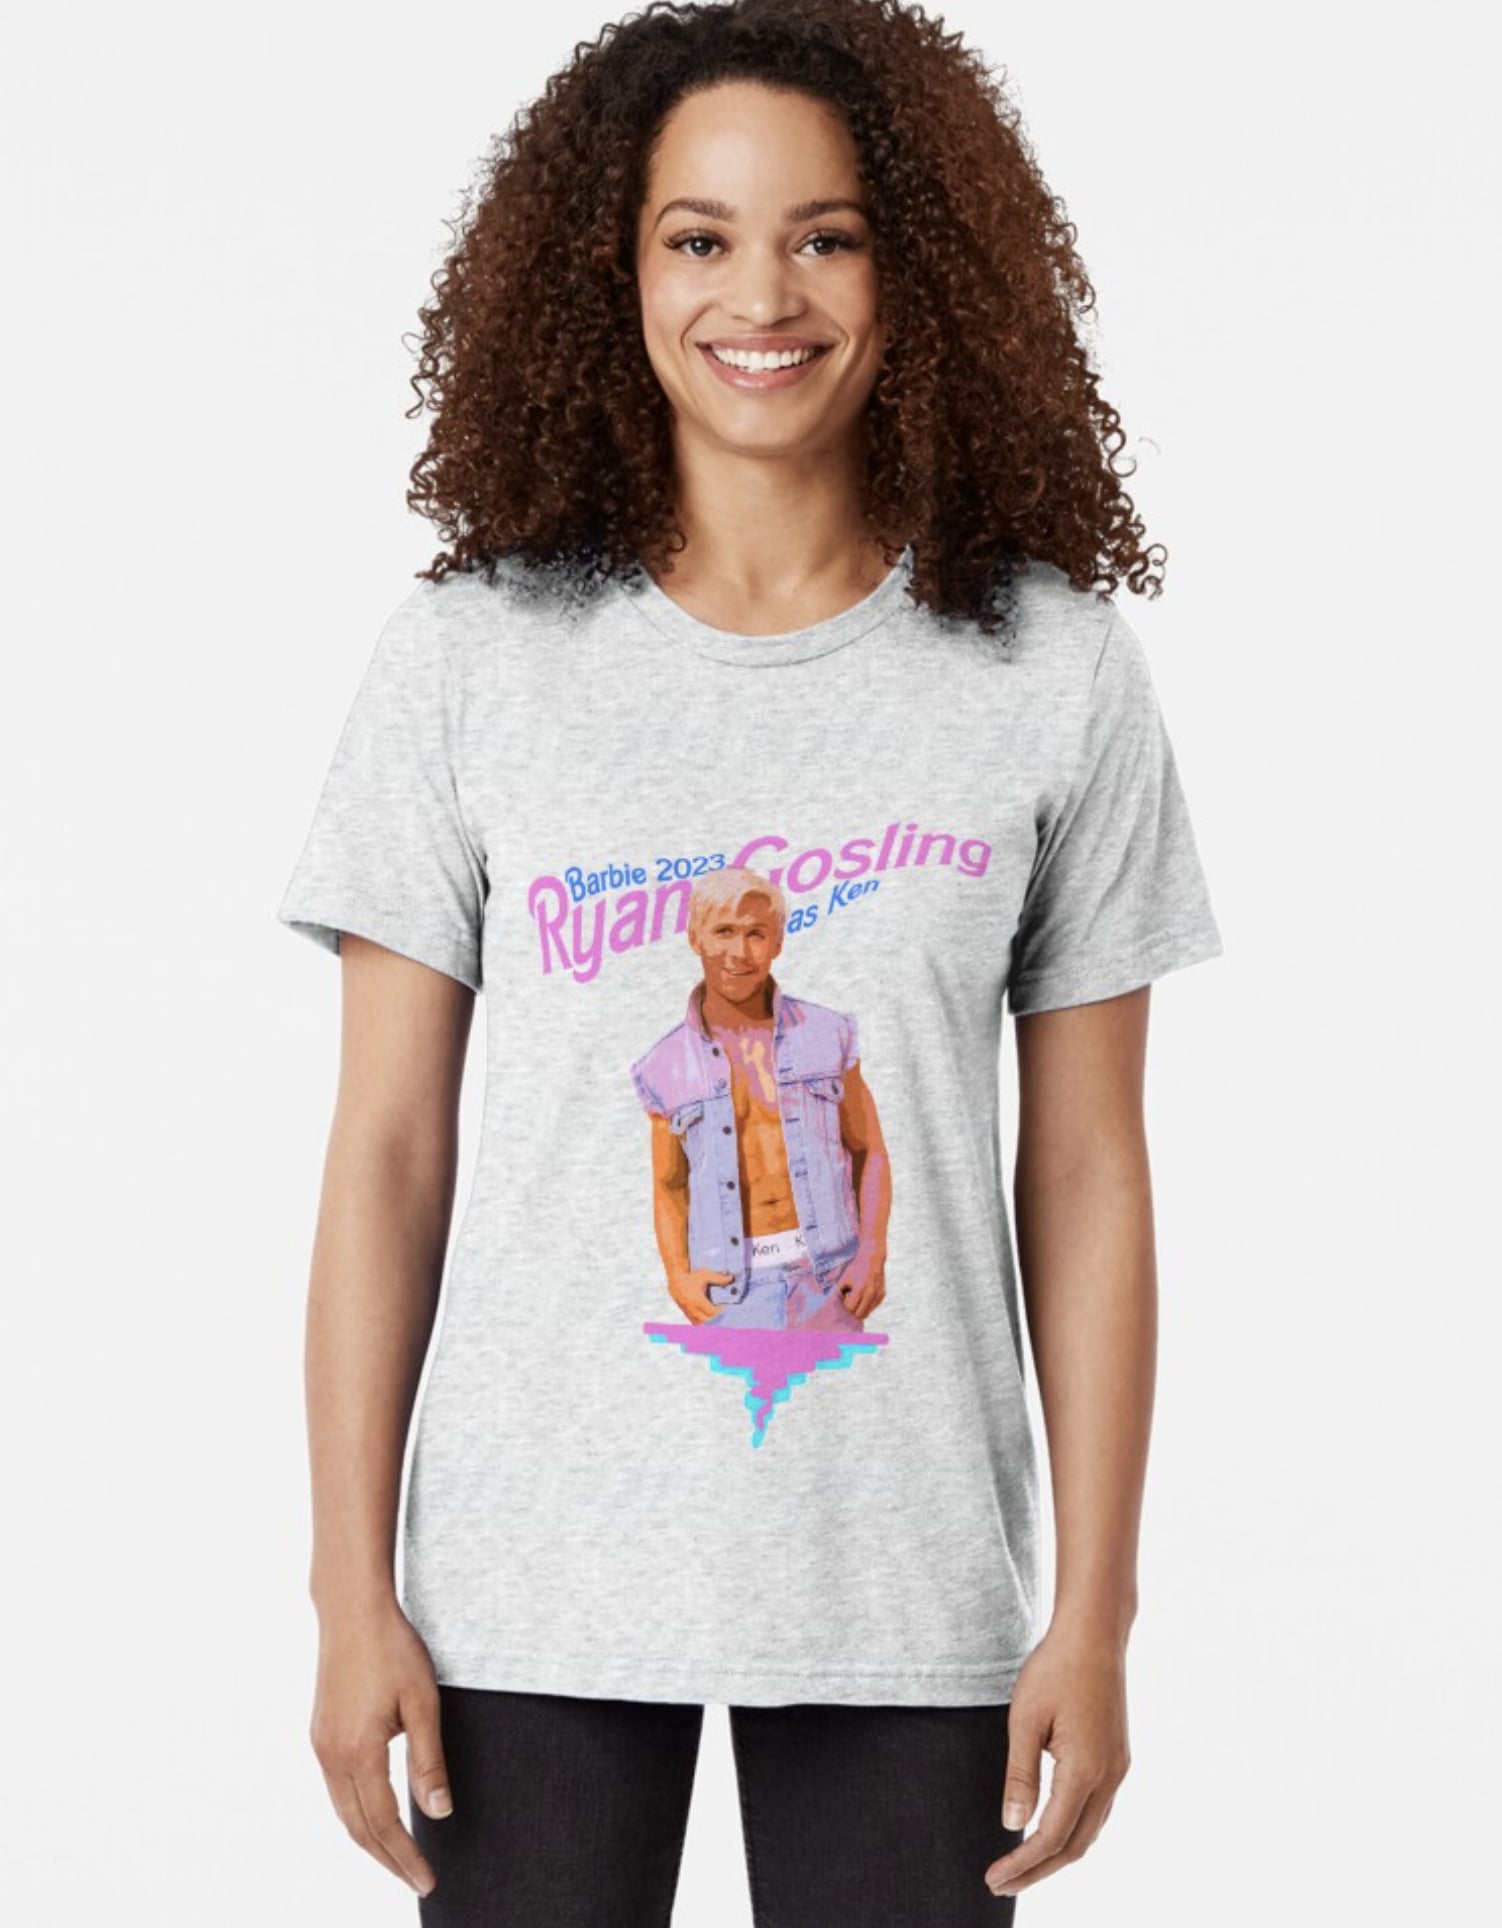 Shop Similar "Barbie" T-Shirt Redbubble | Eva Mendes Is Just Like Us in a Ryan Gosling "Barbie" T-Shirt — and It's Under $25 | POPSUGAR Fashion Photo 3